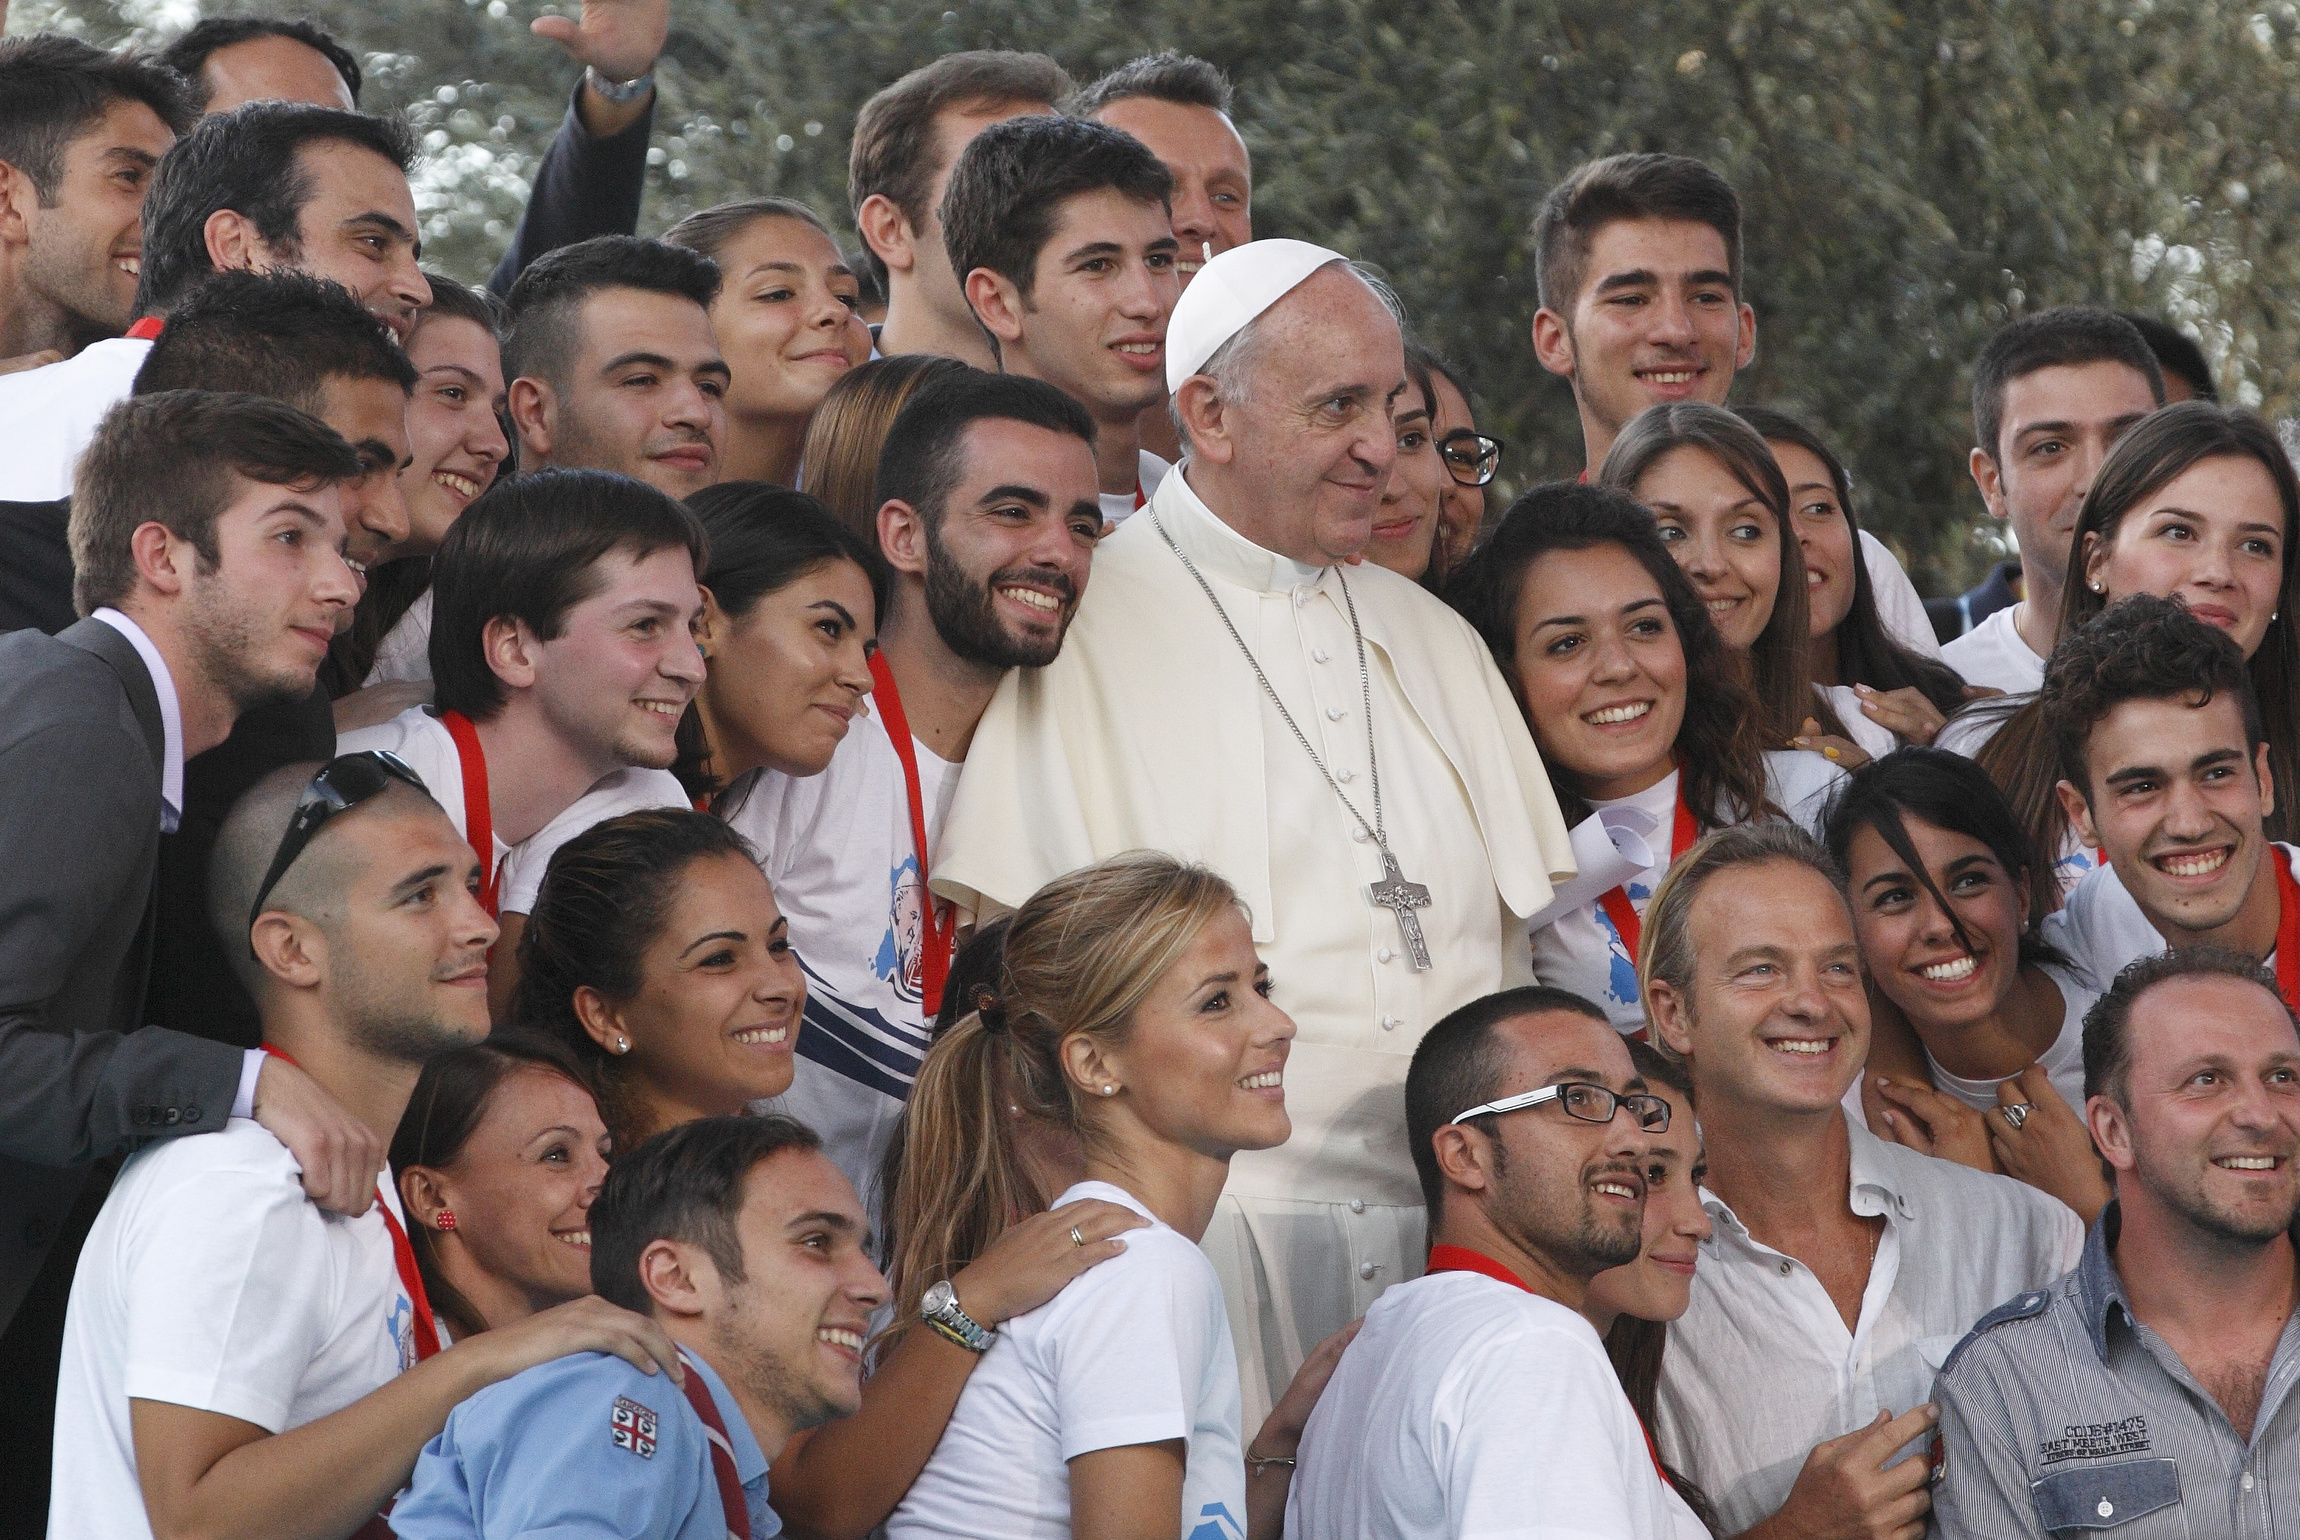 On Sardinia, Pope Pleads For a More Just Economy - The Tablet